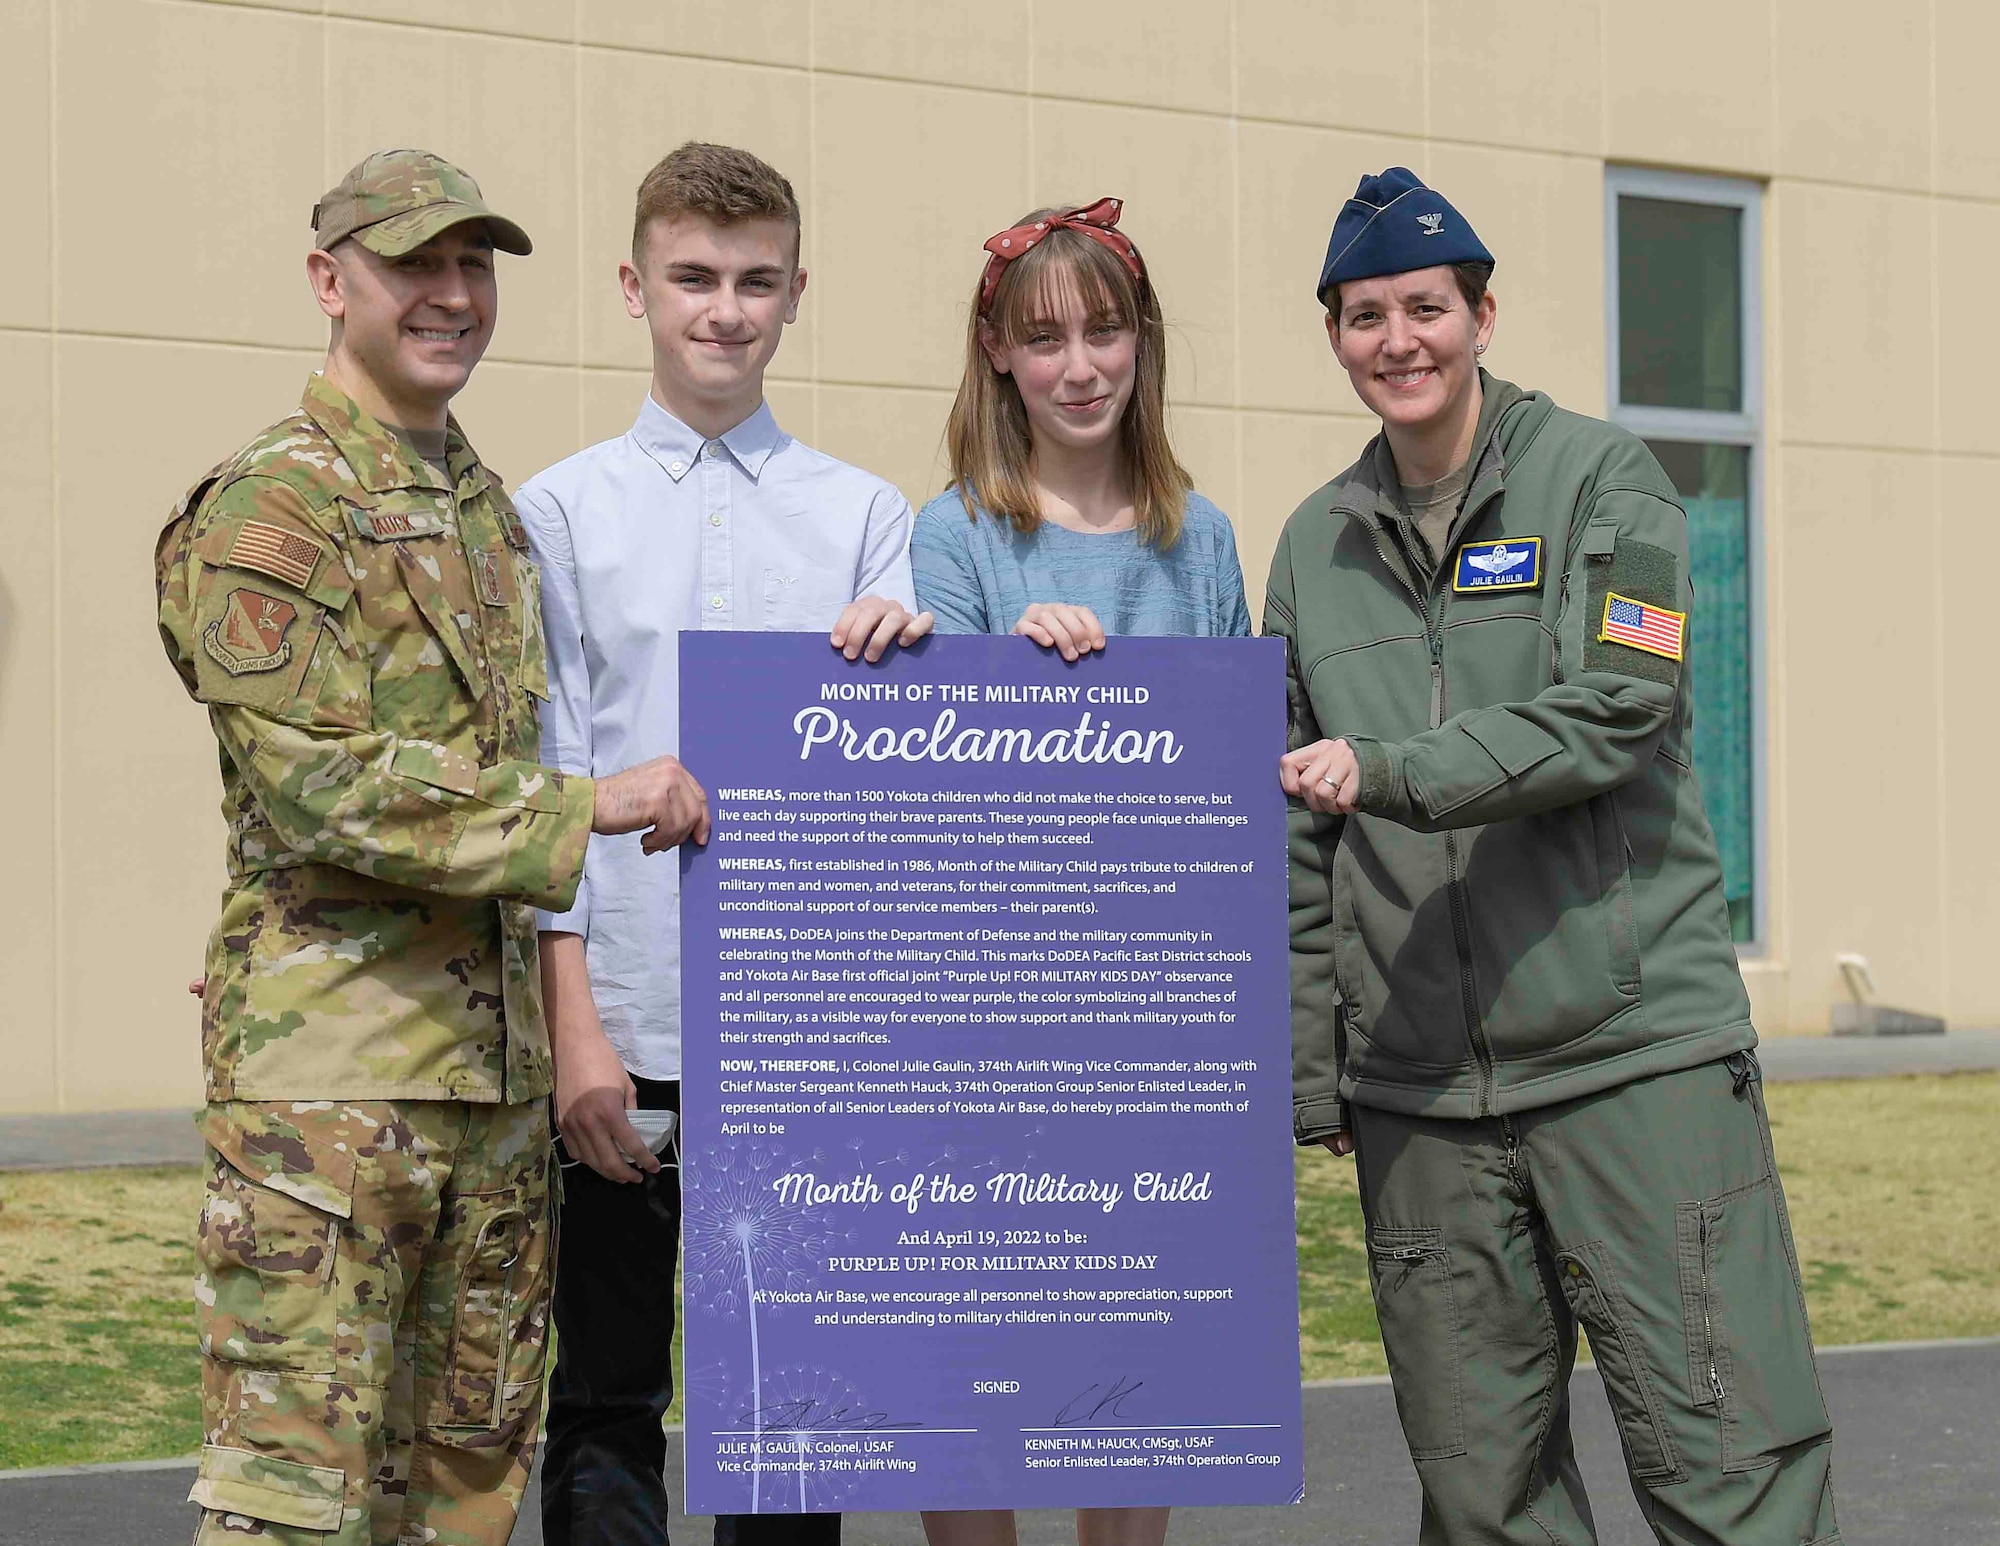 Chief Master Sgt. Kenneth Hauck, left, 374th Operations Group command chief, and Col. Julie Gaulin, right, 374th Airlift Wing vice commander, pose for a photo with Yokota Middle School student after a Month of the Military Child proclamation event at Yokota Air Base, Japan, April 7, 2022.